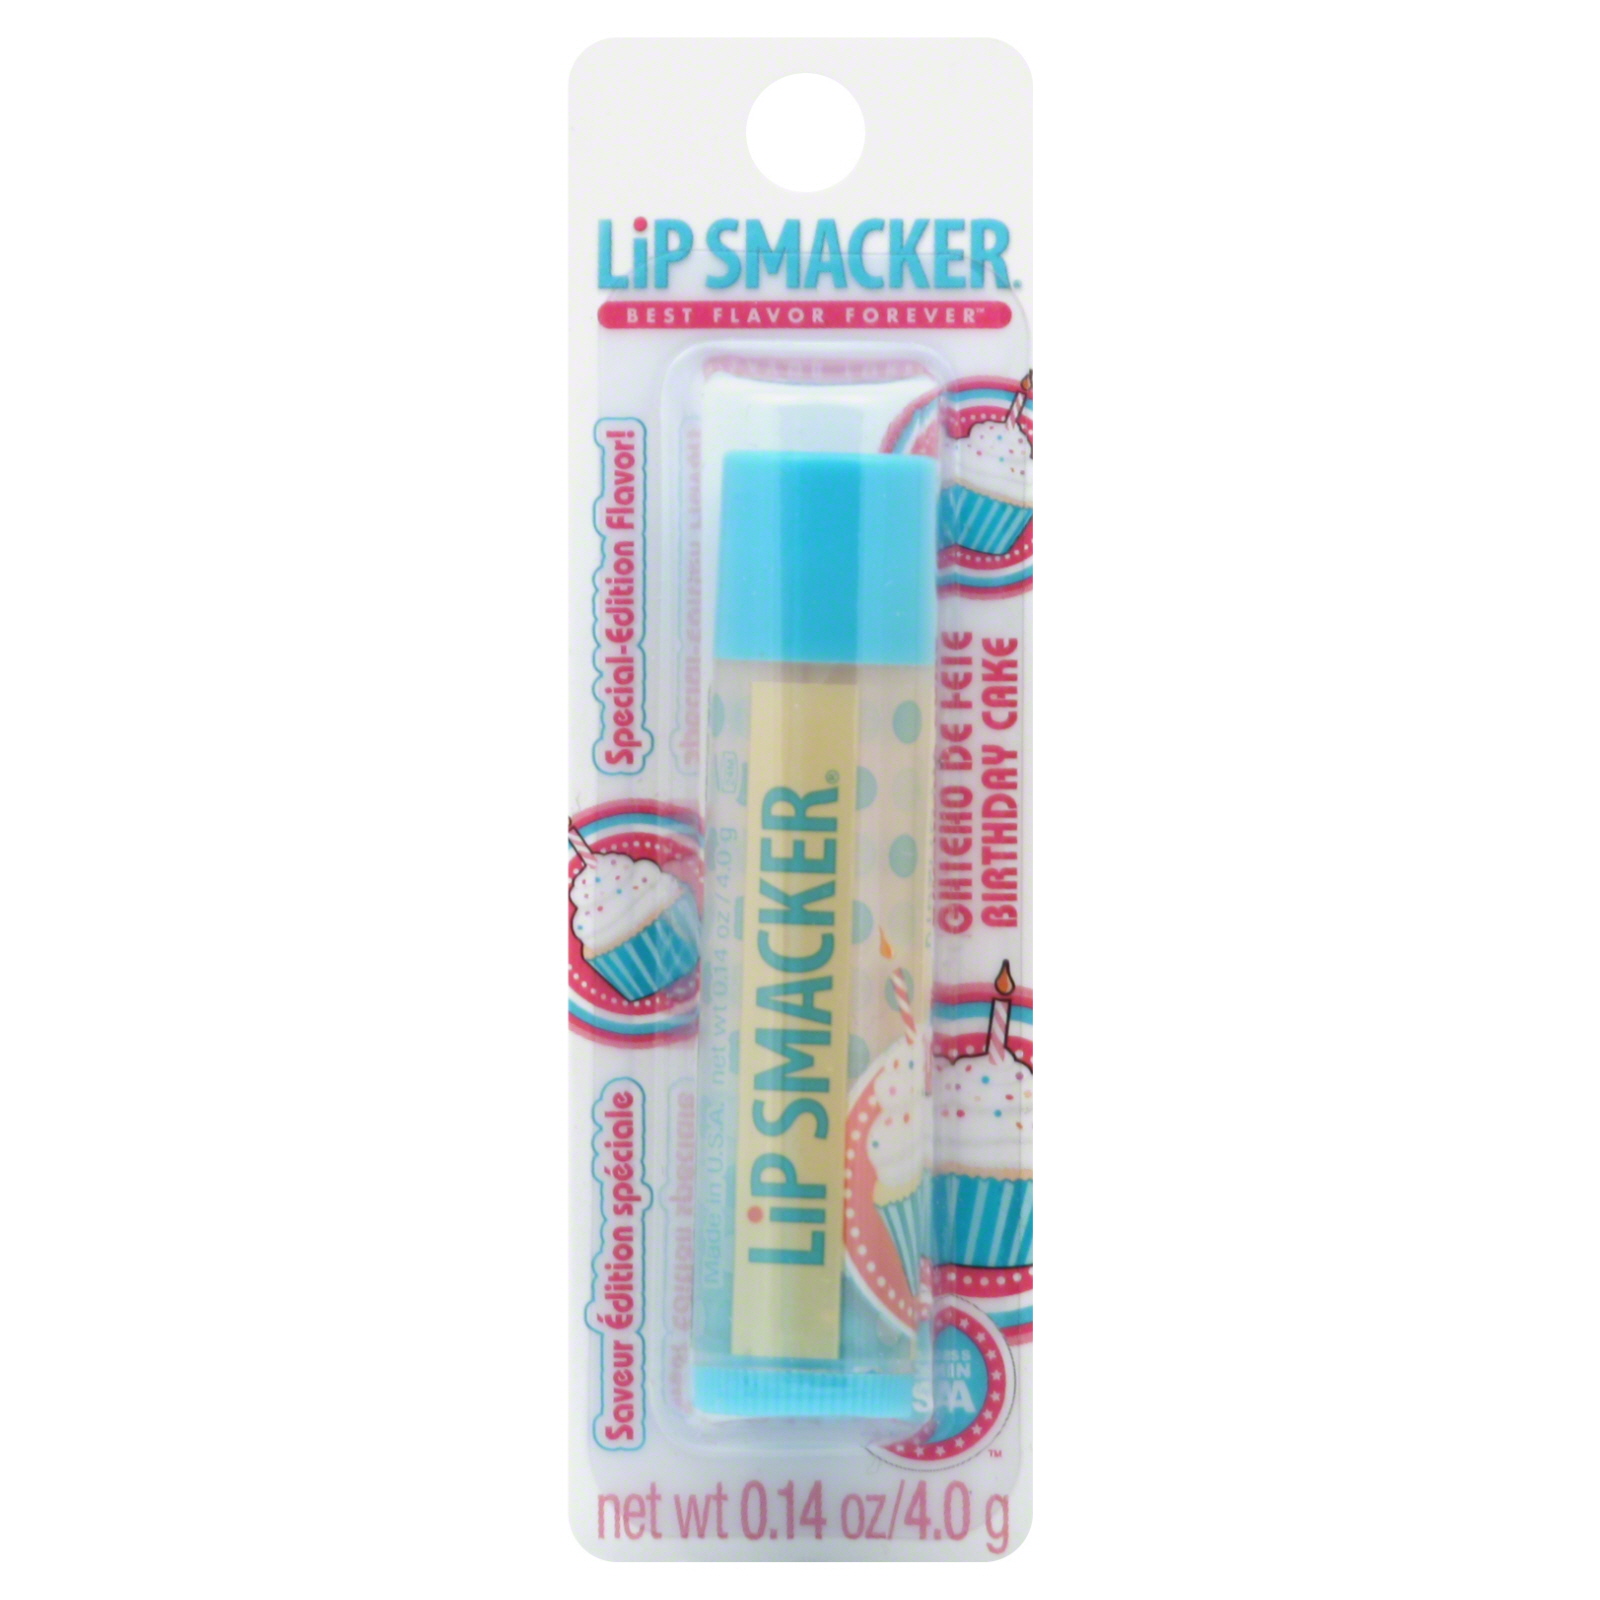 Lip Smacker Limited Edition, Rotate, 0.14 oz